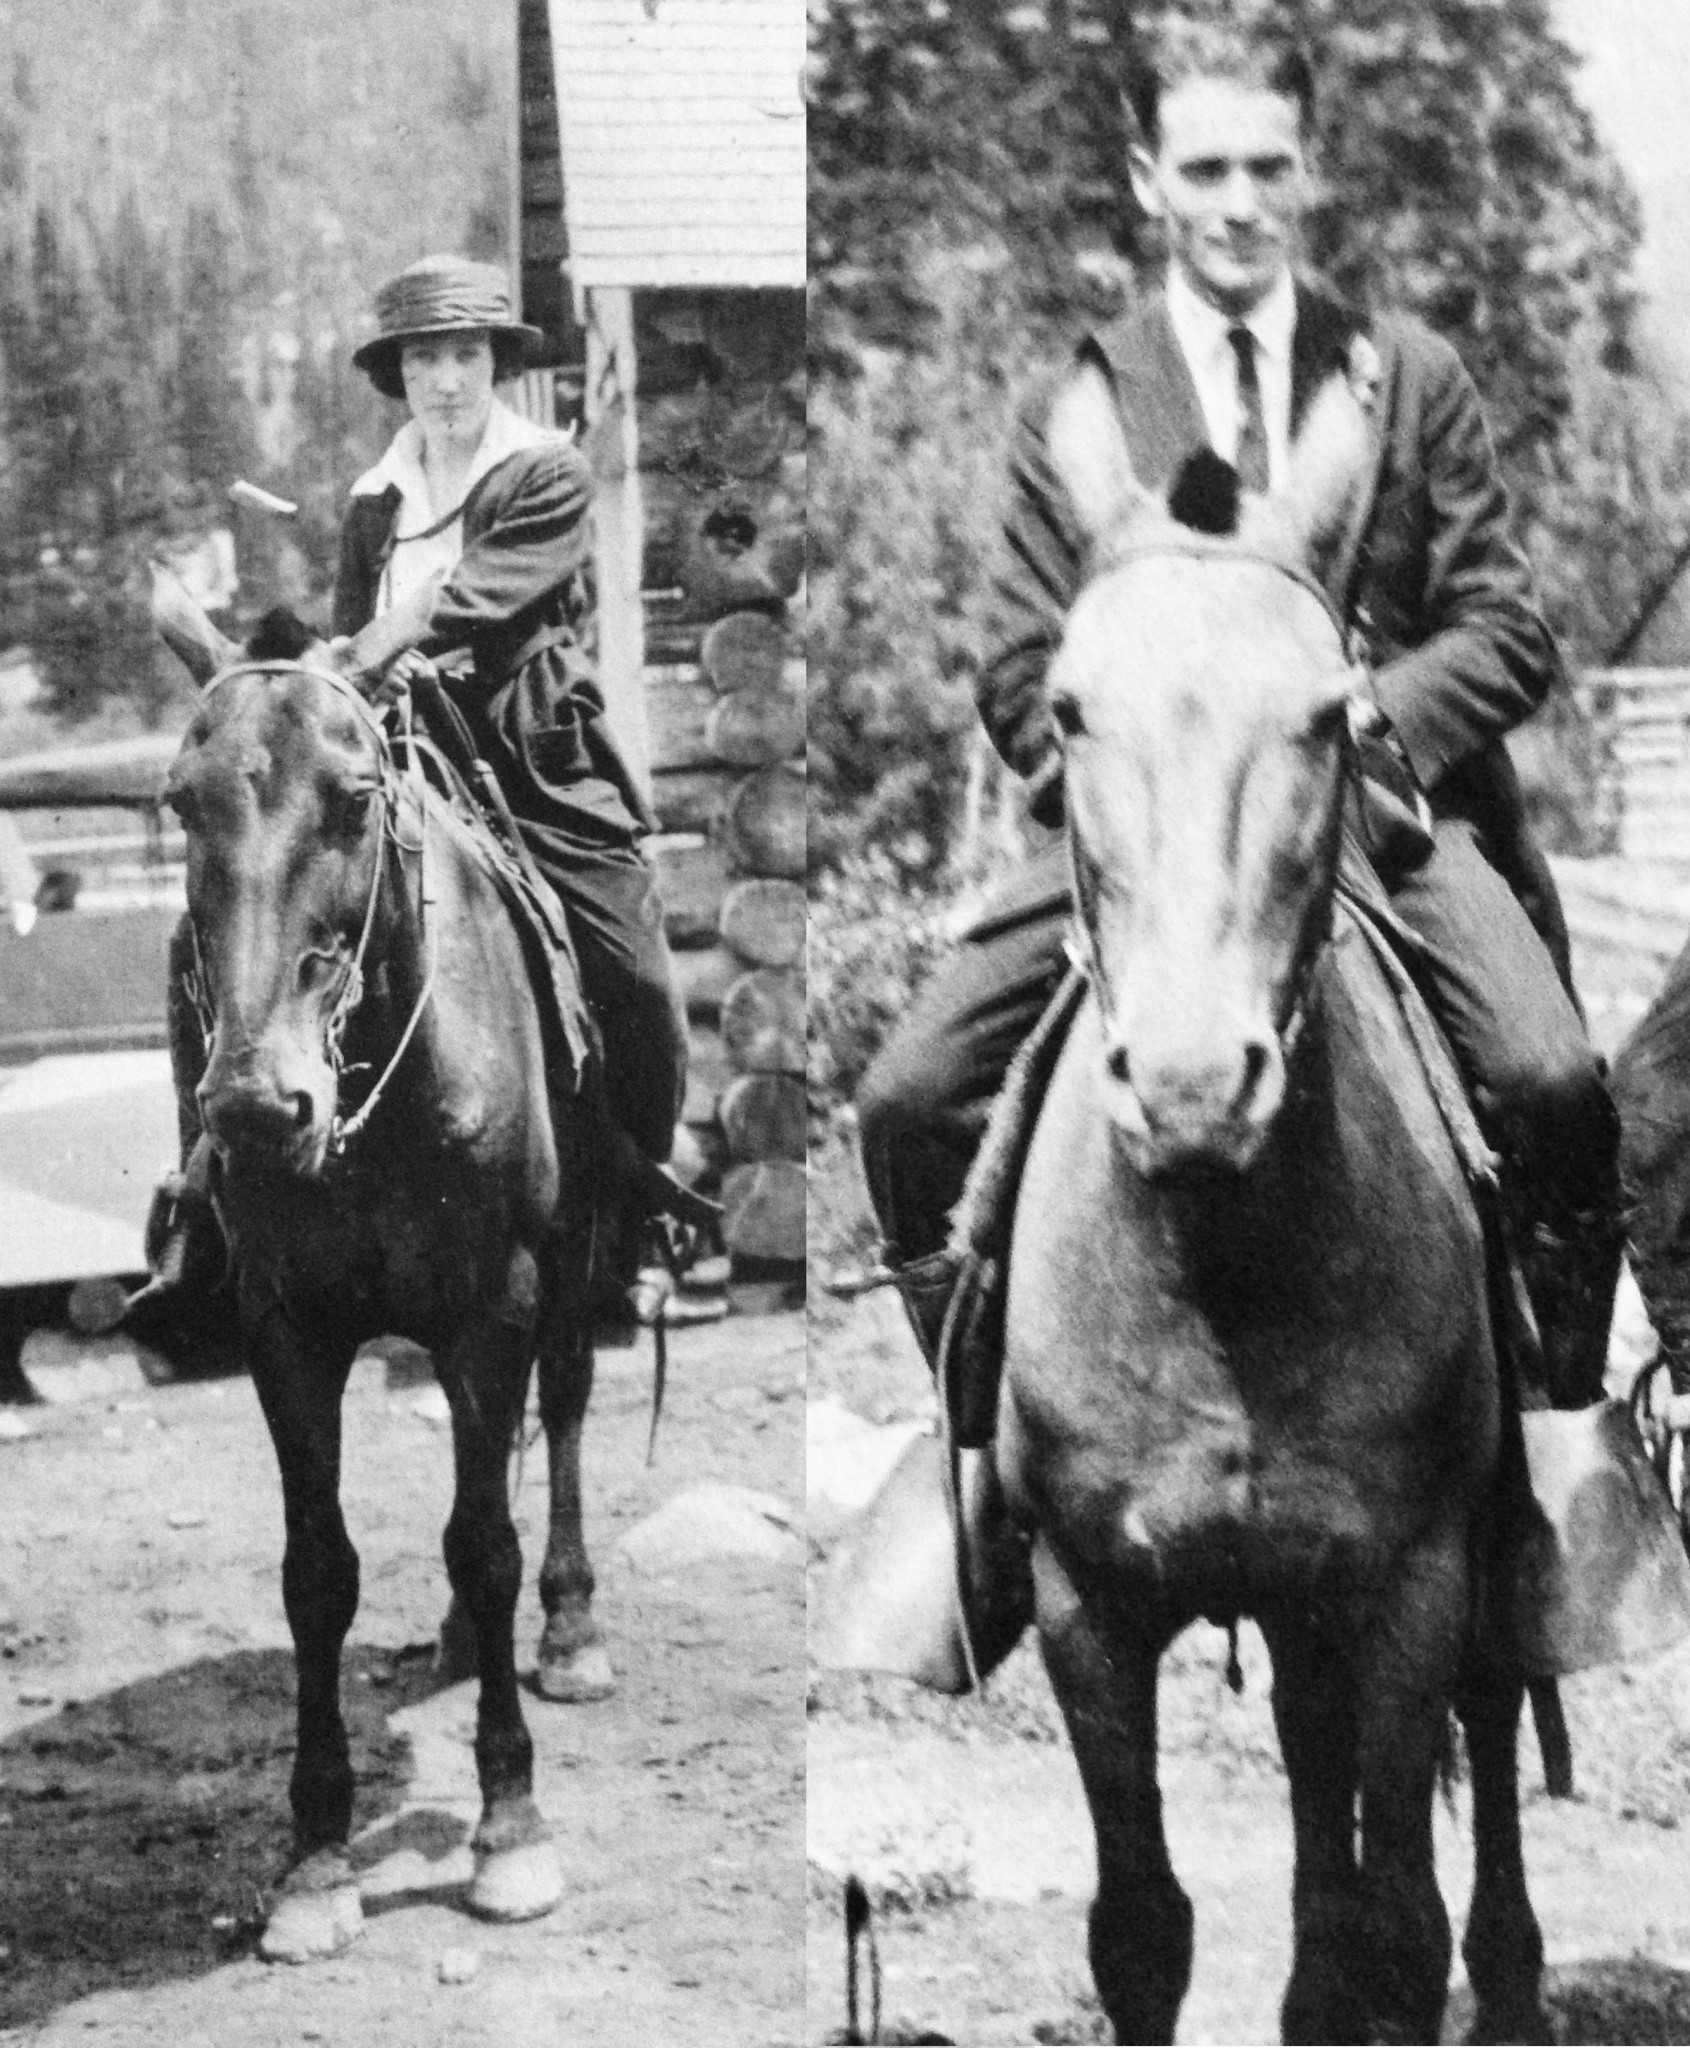 My paternal grandparents riding at their cabin in the mountains in Utah 1920. (Photos from family archives)